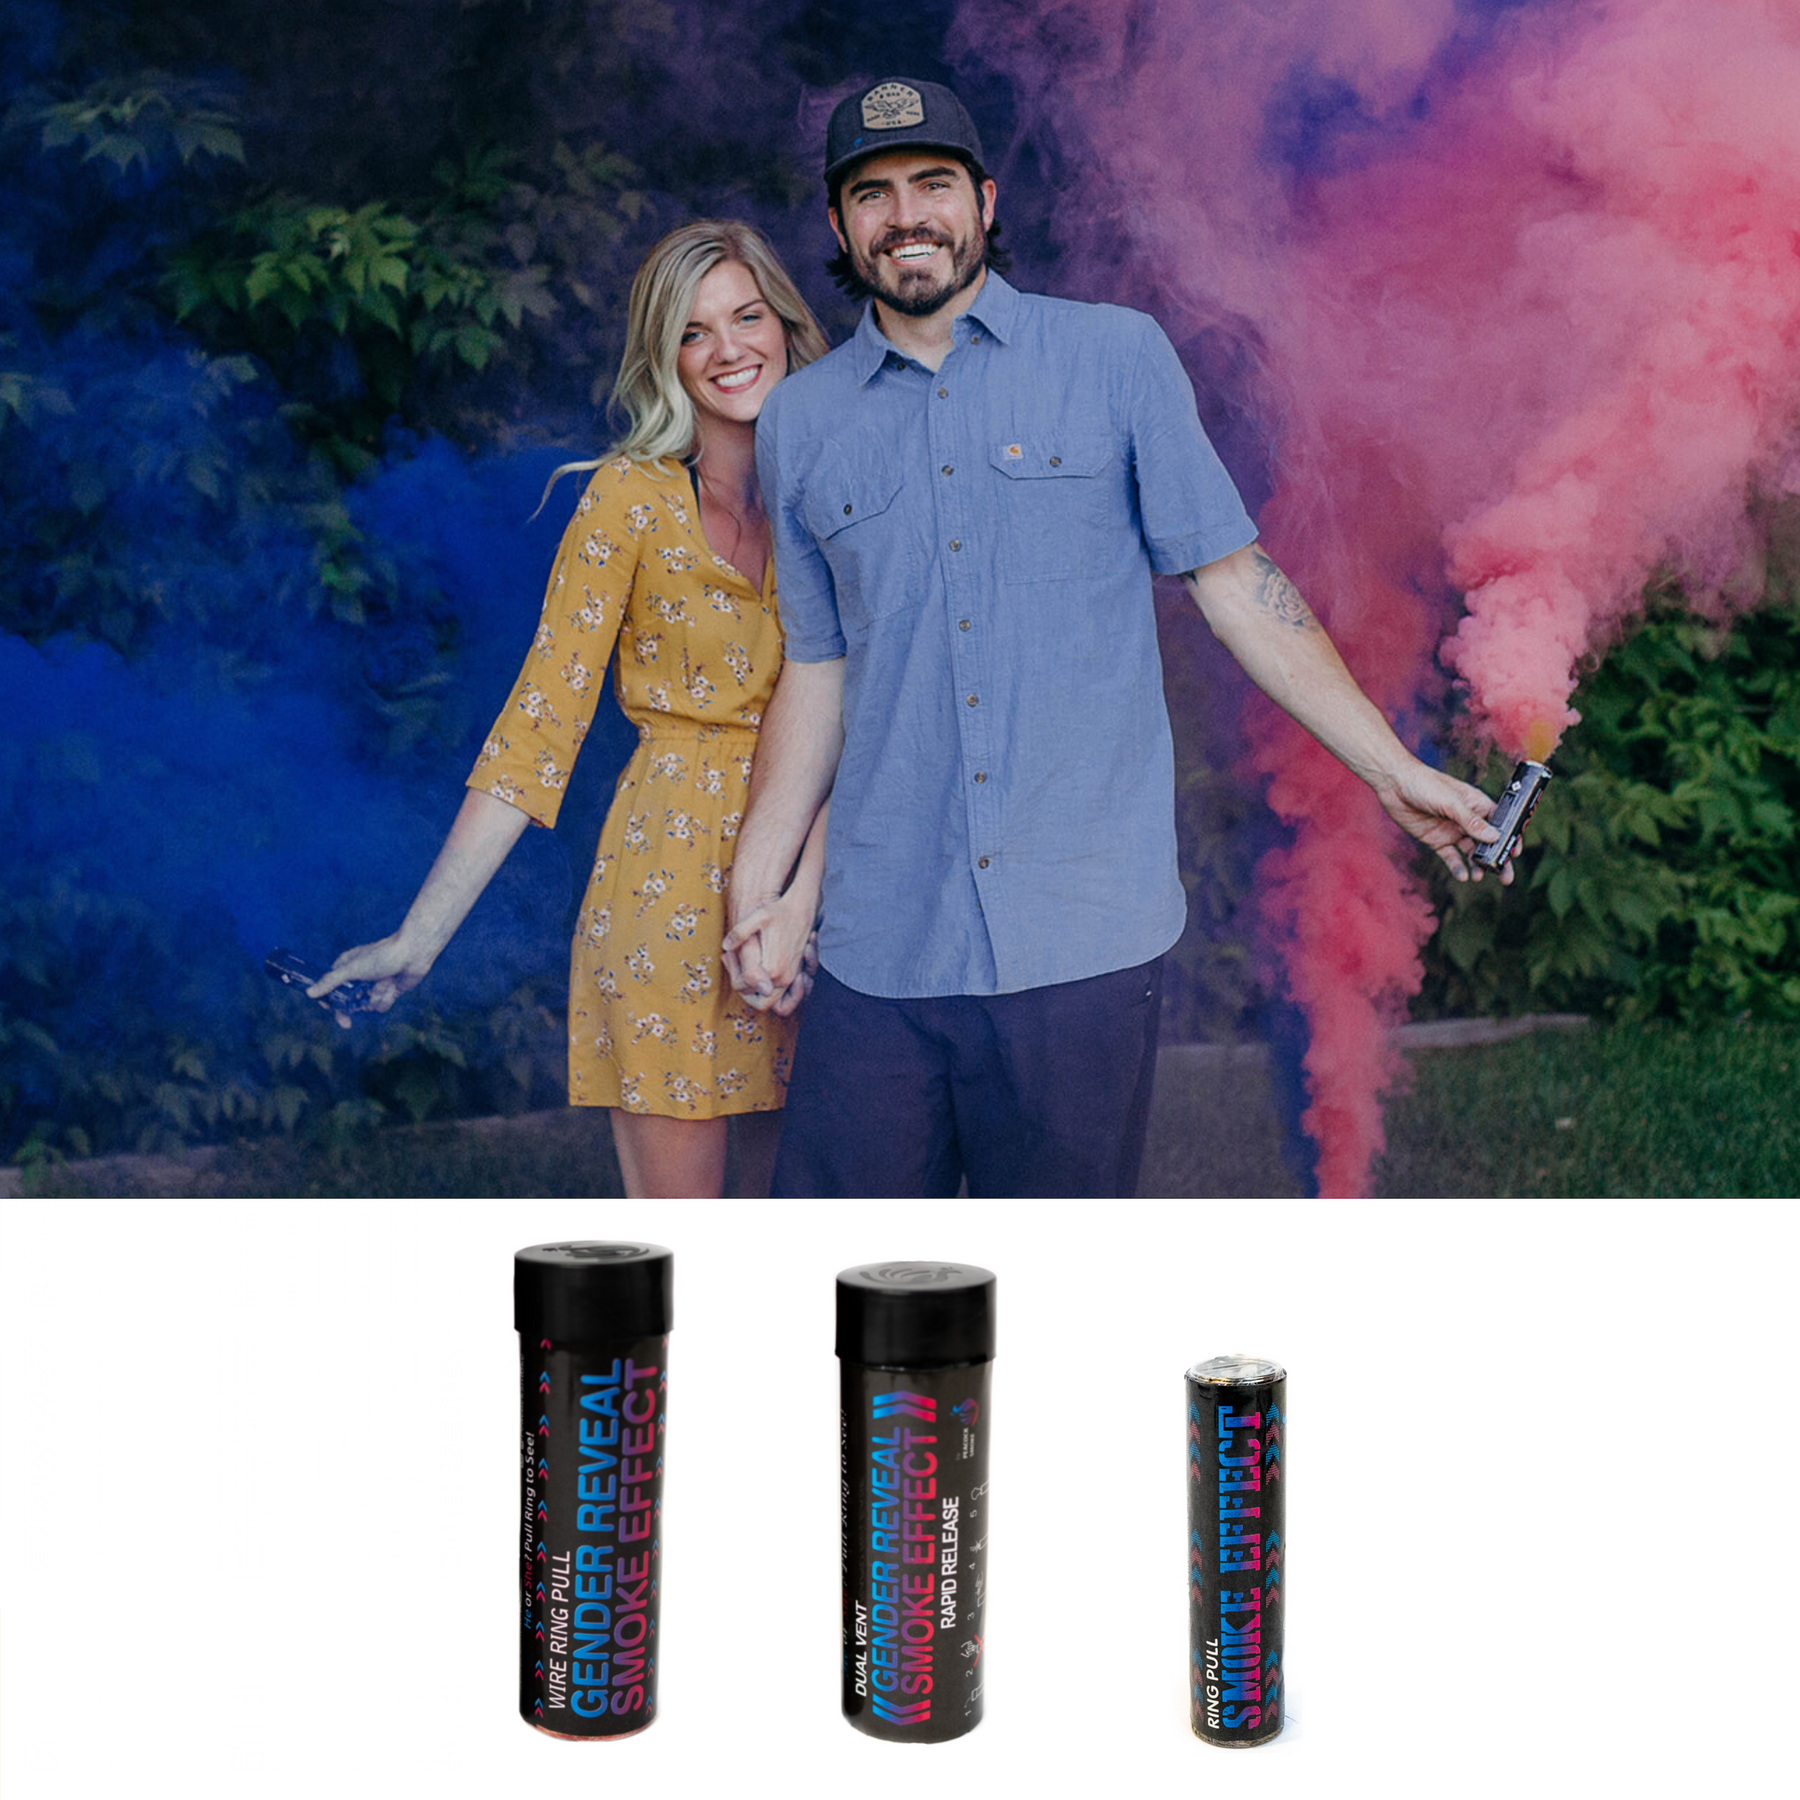 RING PULL 30 SECOND MINI SMOKE BOMBS – Peacock Sparklers